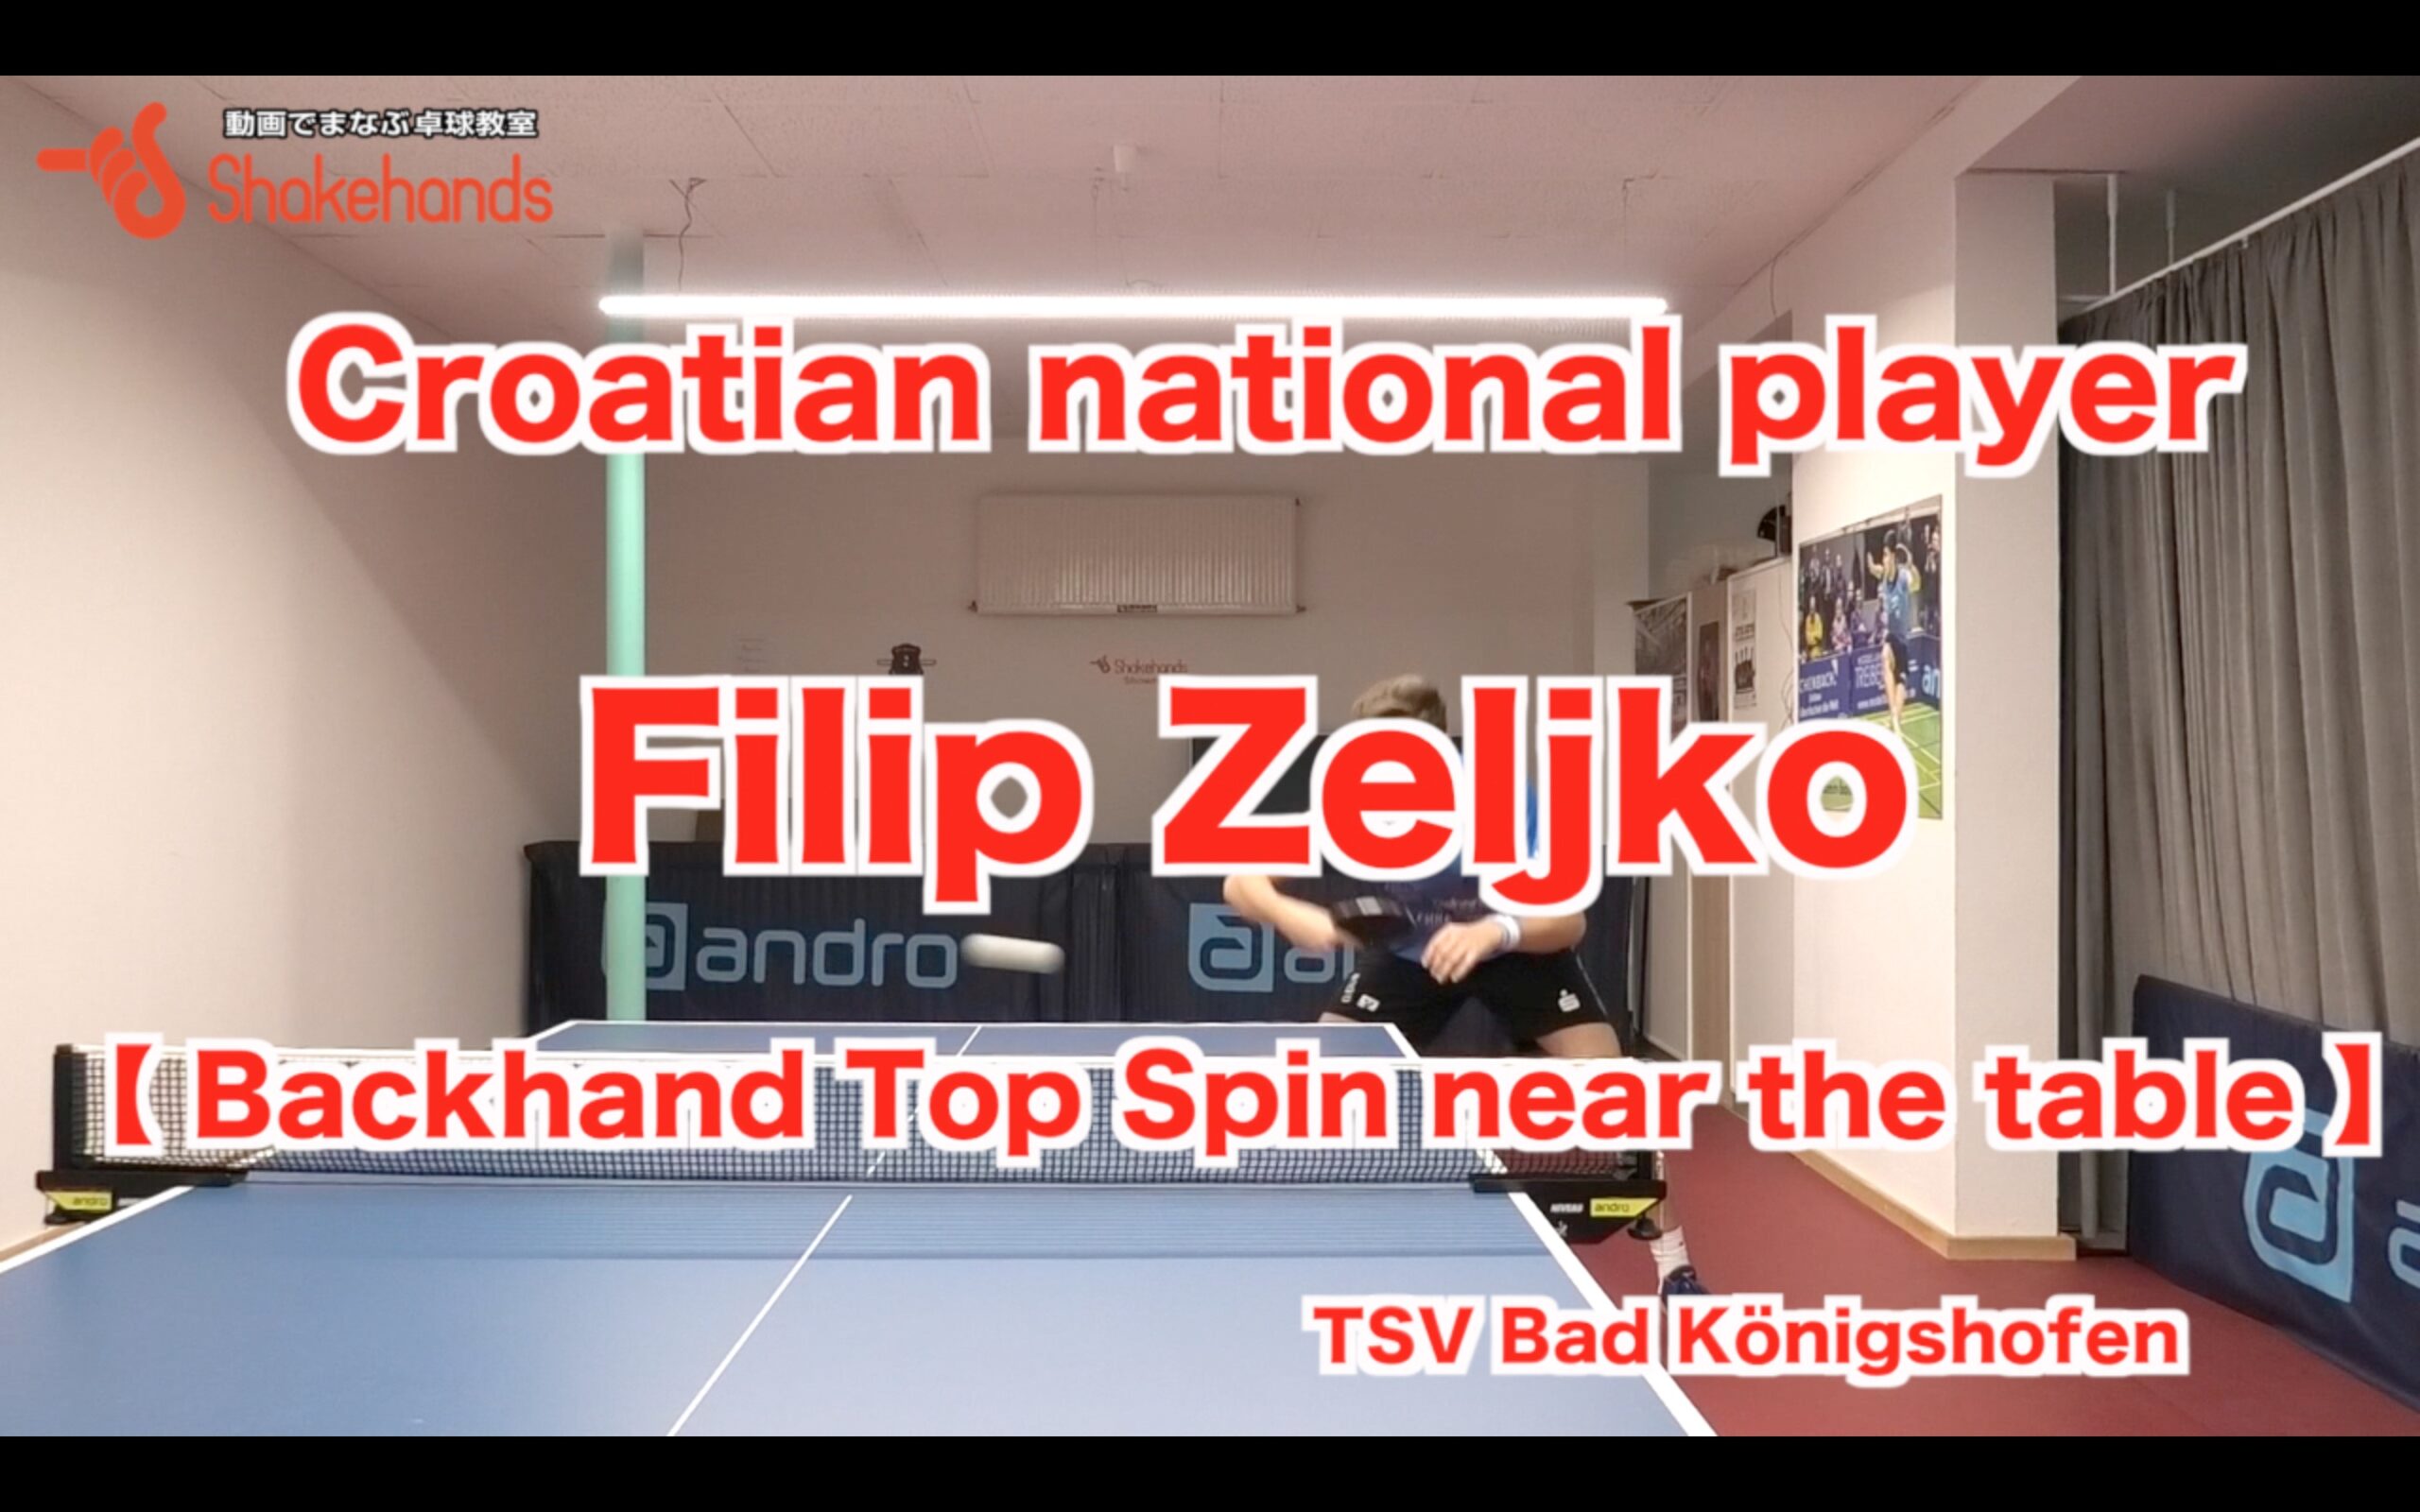 Backhand top spin near the table